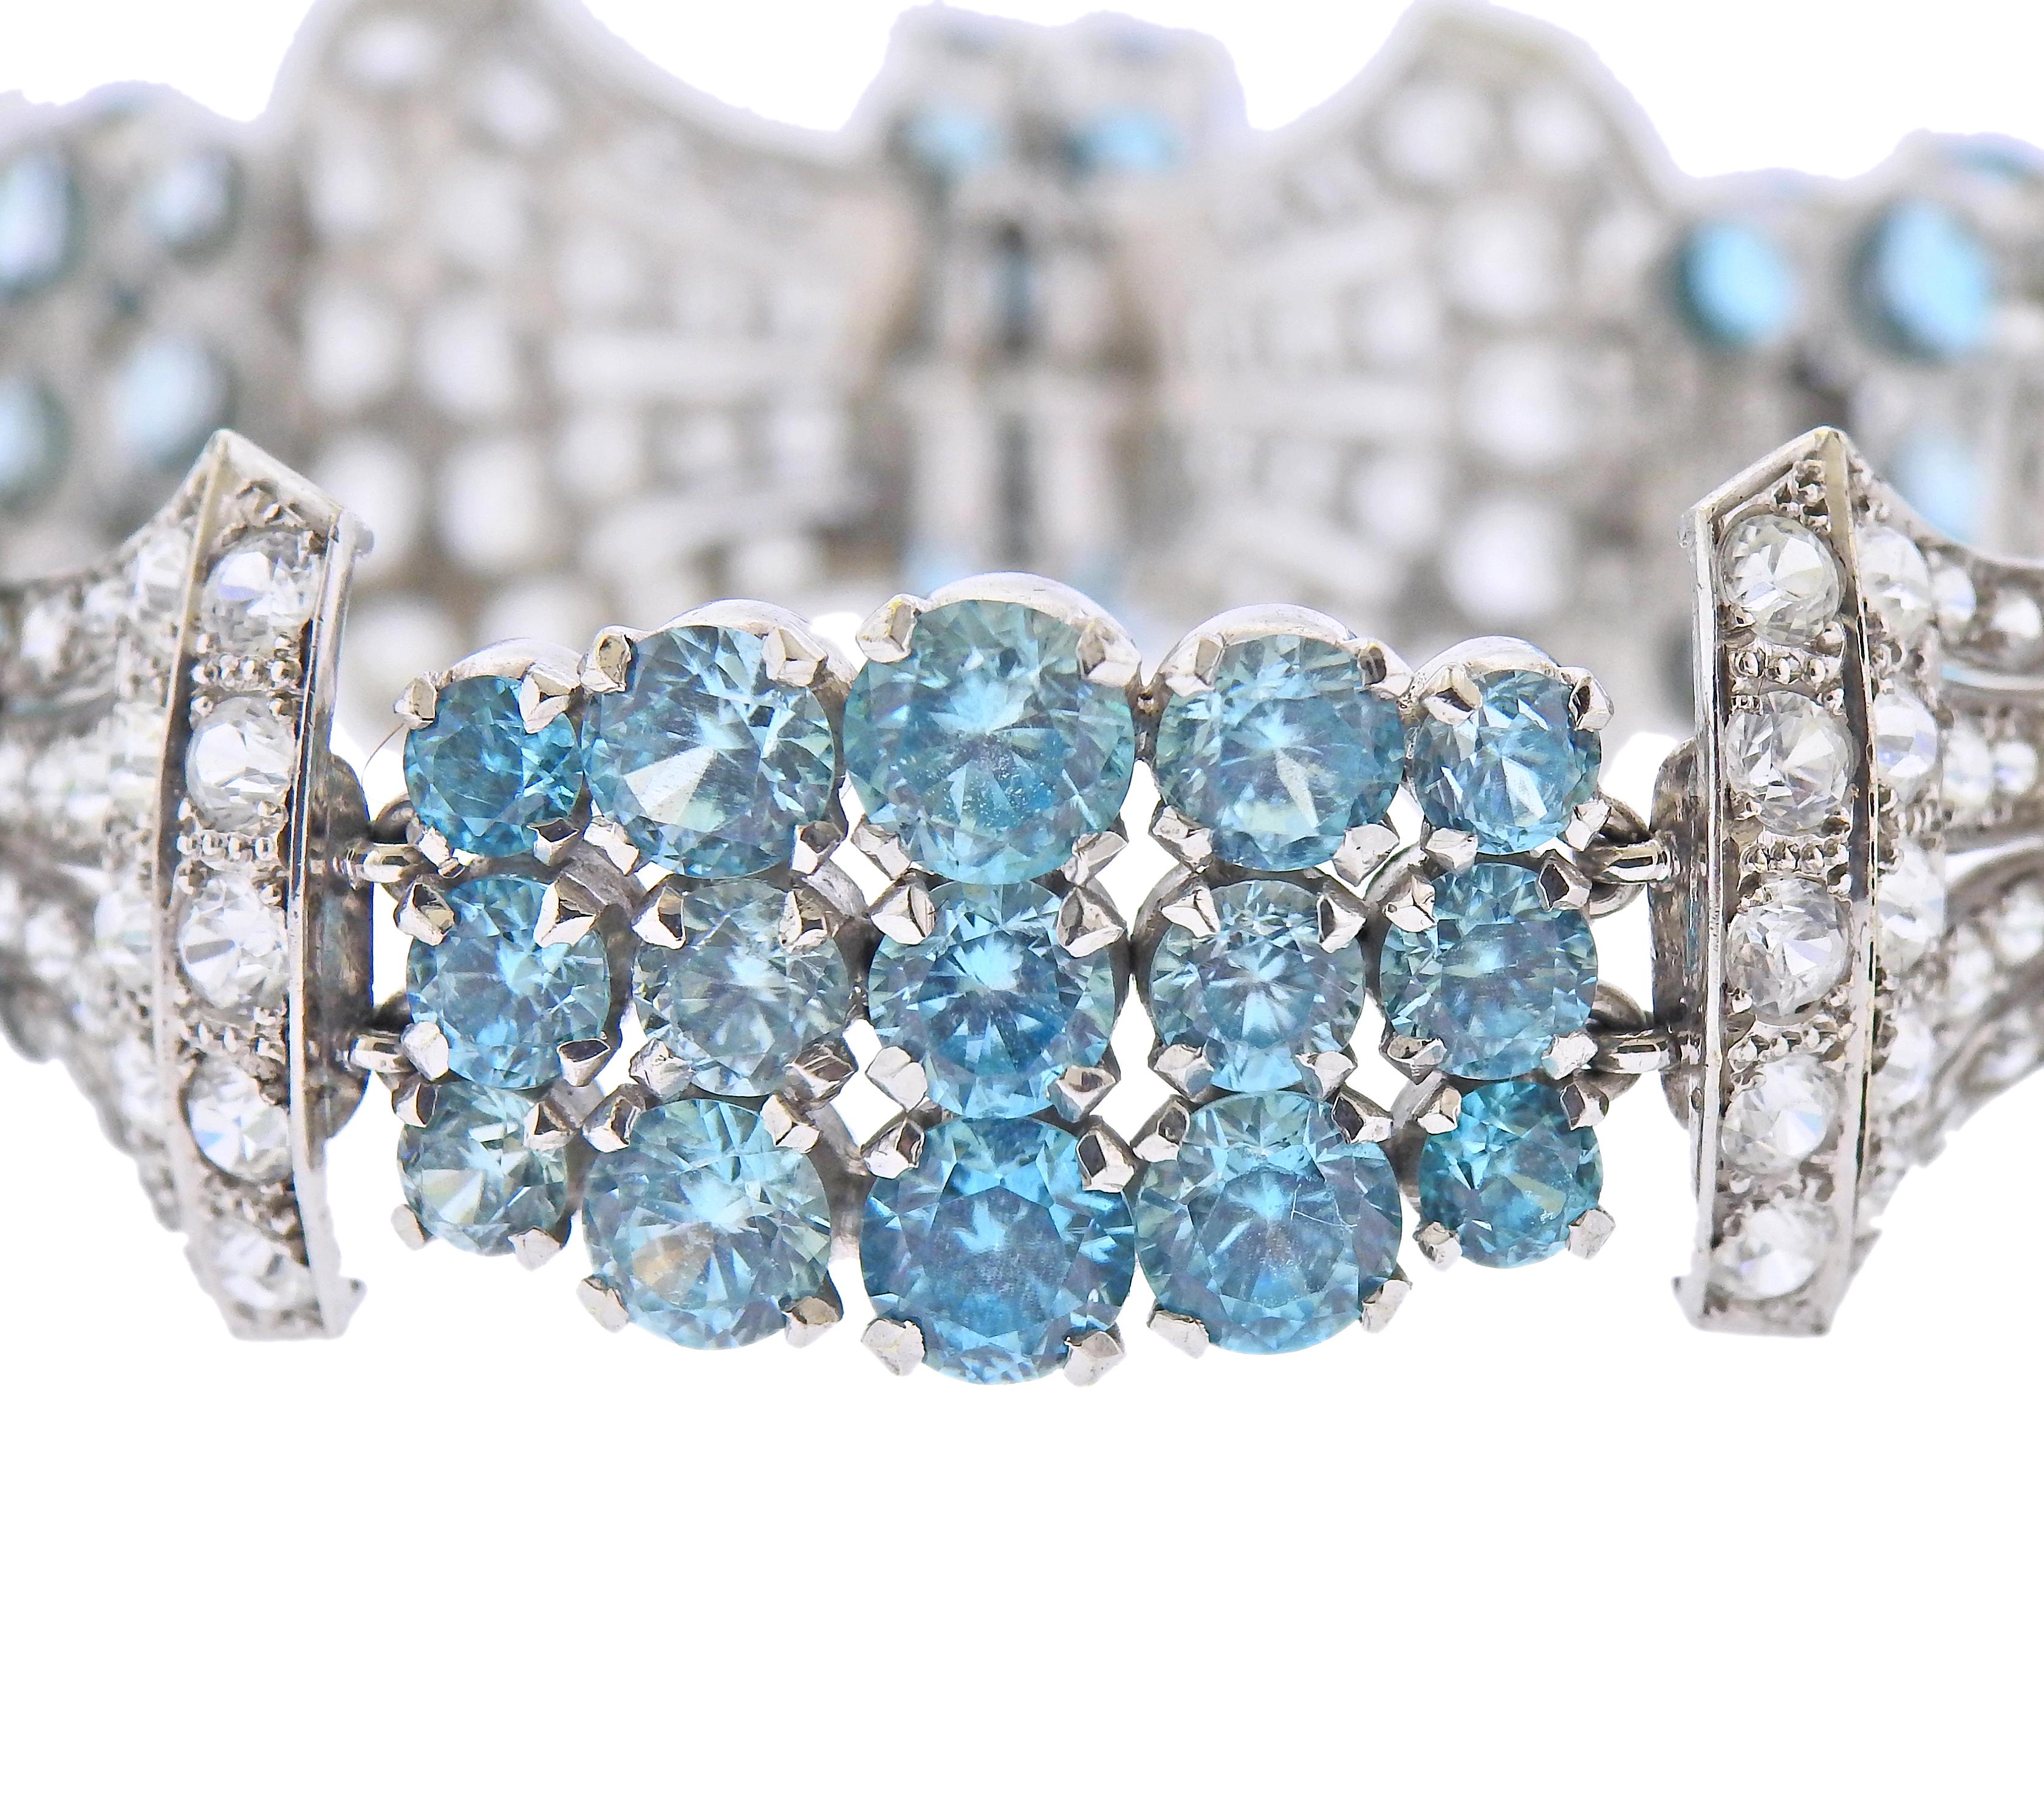 White Zircon and Blue Zircon Canadian-made by Birks, 9k white gold bracelet with blue gemstones and approx. 6 carats in white sapphires . Bracelet is 6.75